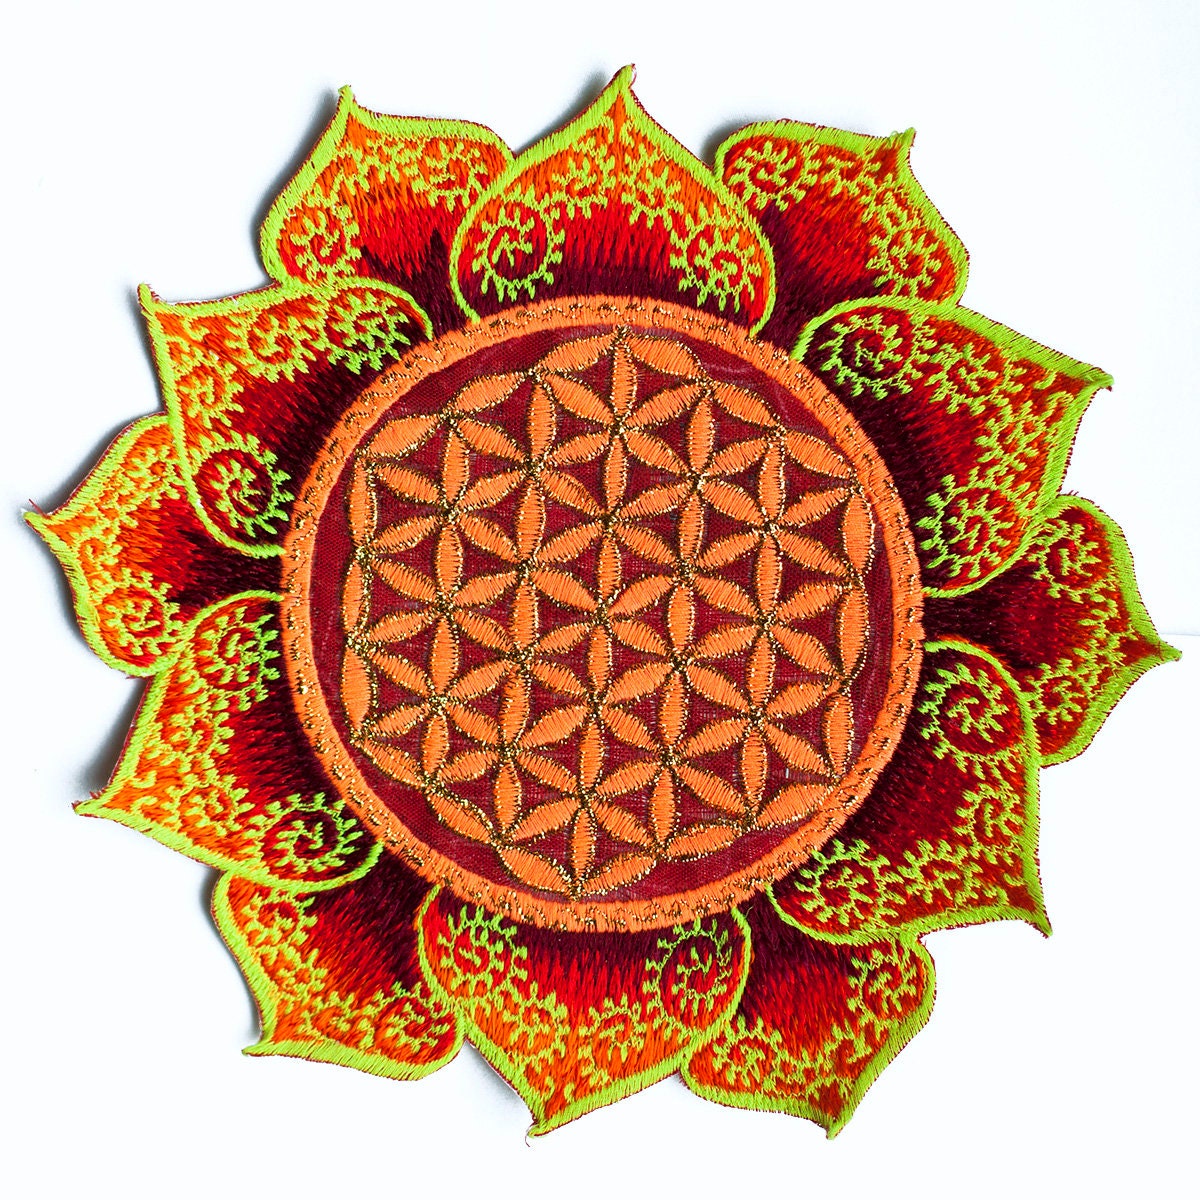 Golden Flower of Life fractal patch holy geometry sacred geometry yantra